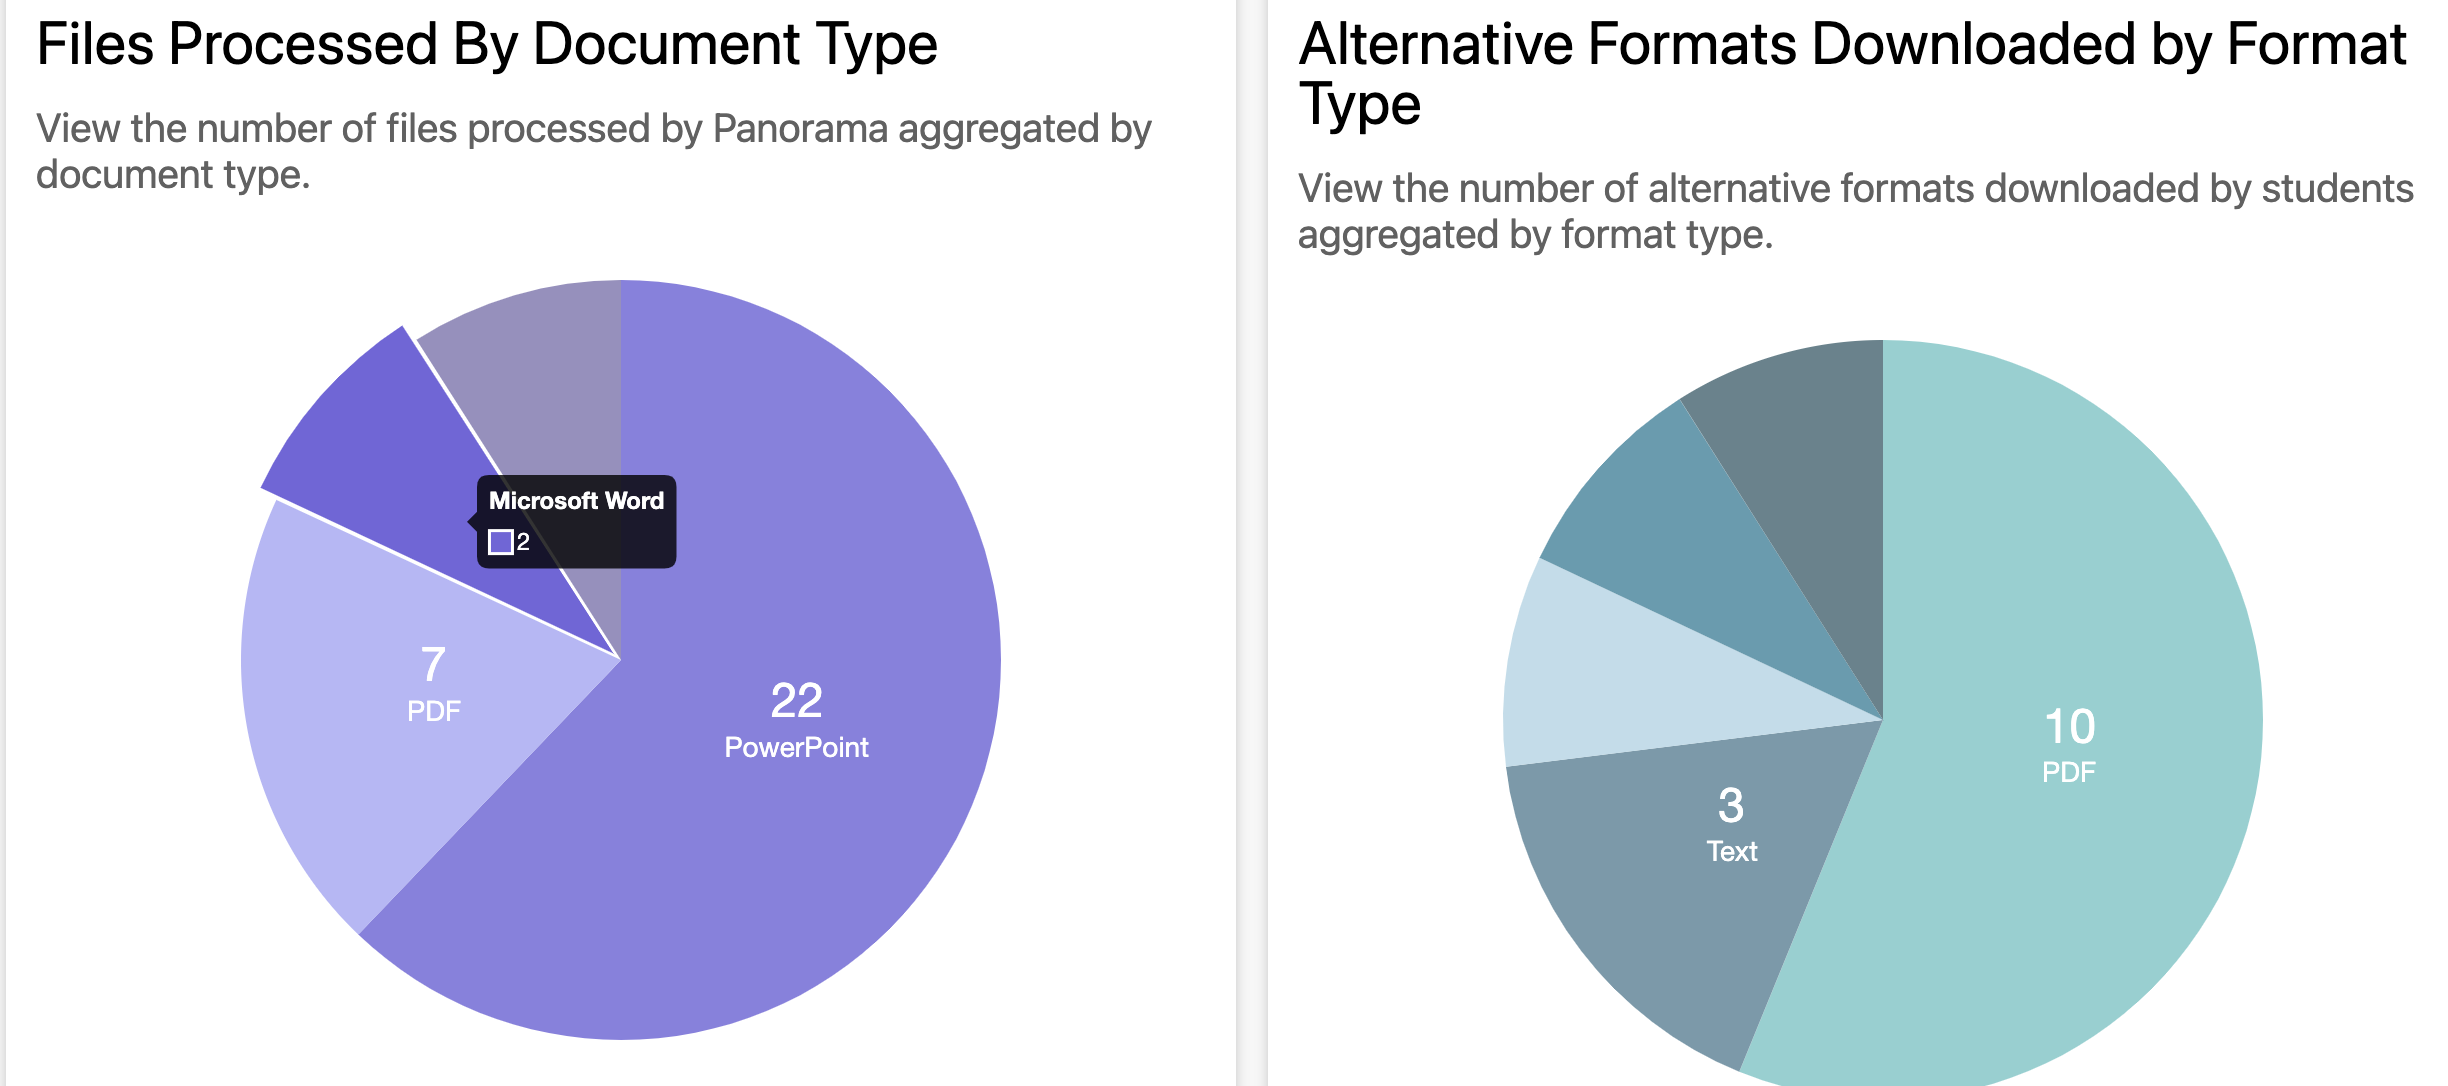 Screenshot of pie charts showing files and formats processed by document type on a course.